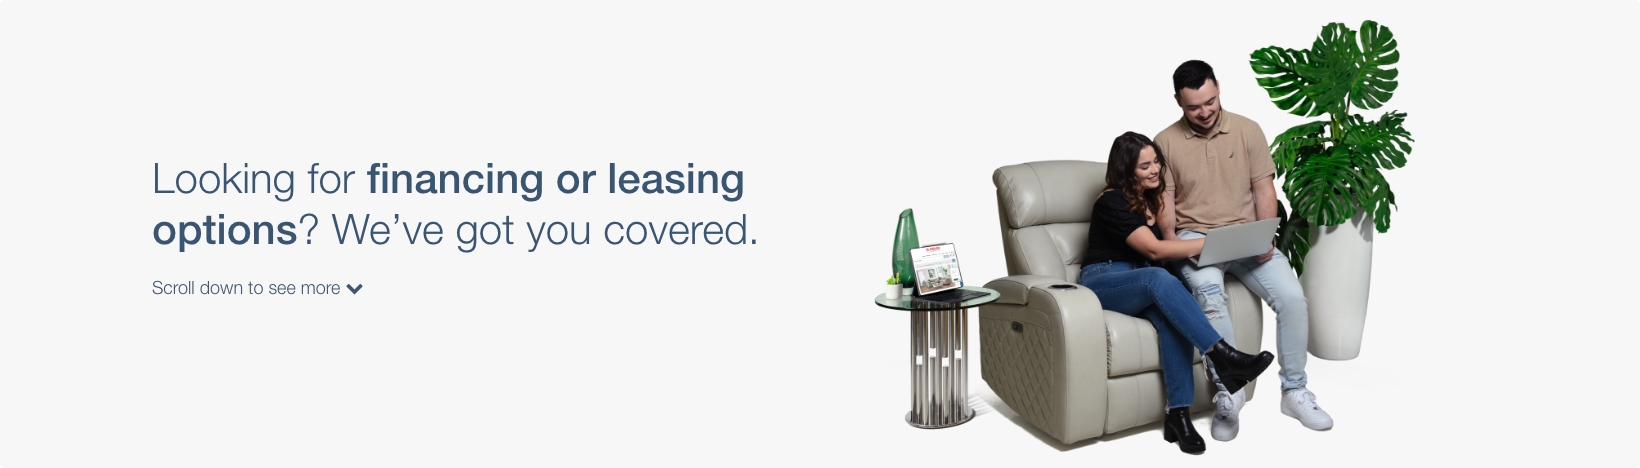 Looking for financing or leasing options? We've got you covered.